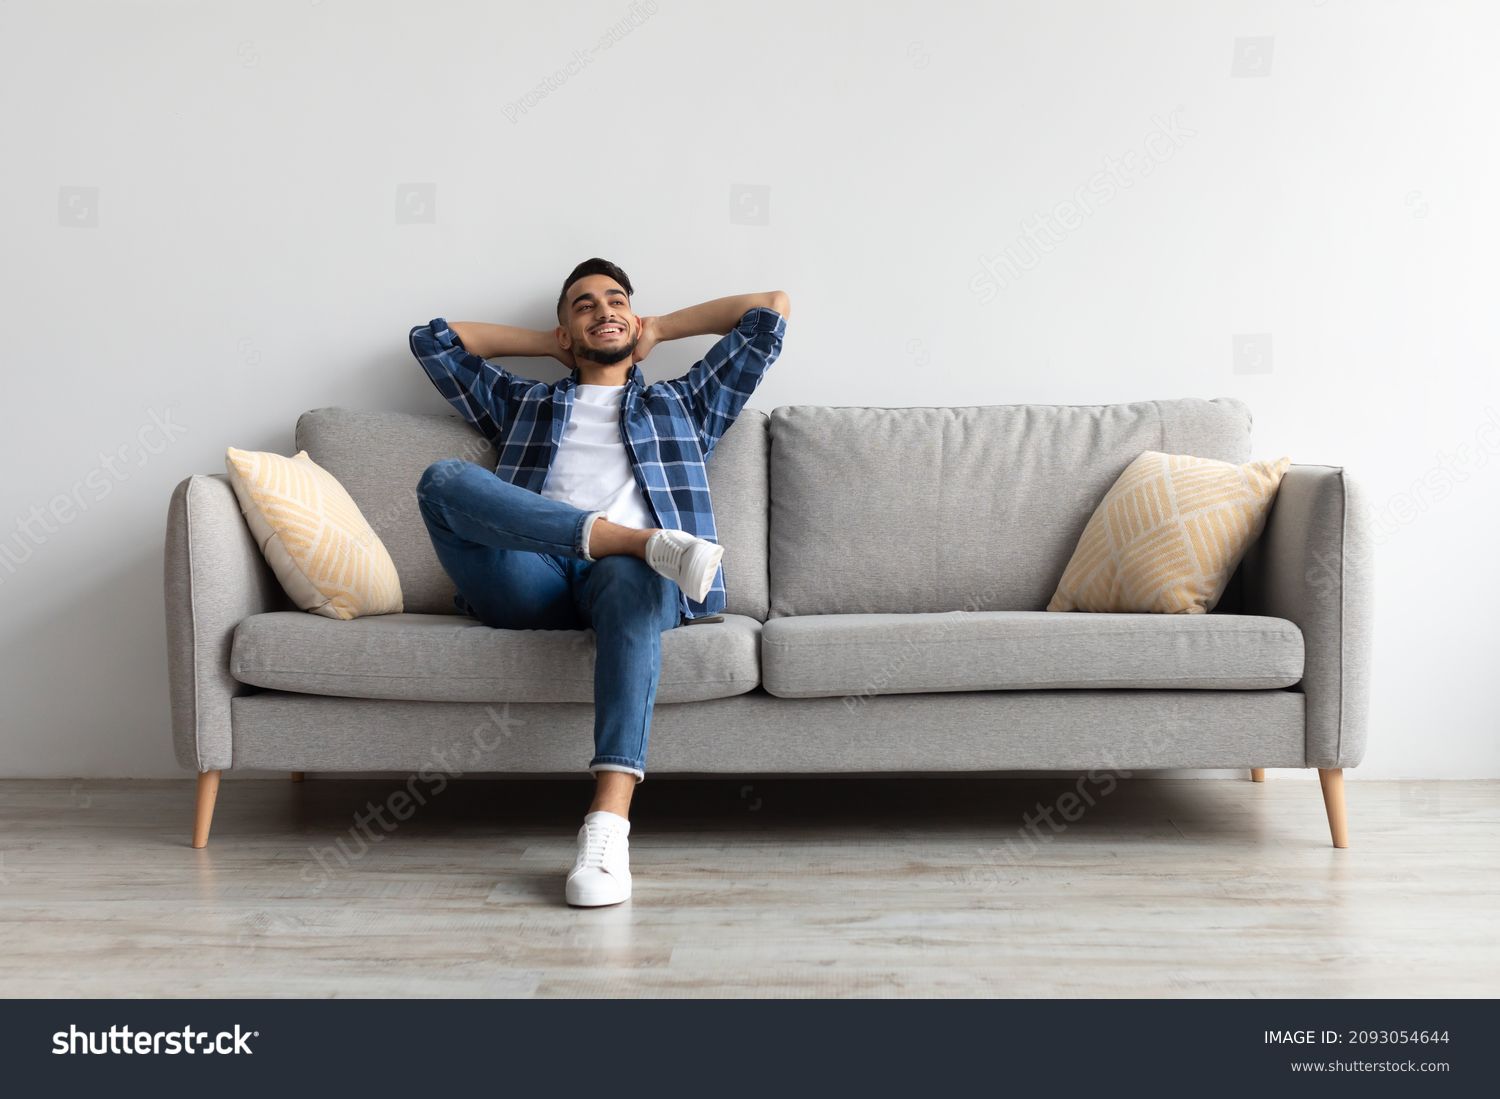 Rest Concept. Happy Middle Eastern guy sitting on comfortable couch at home in living room. Cheerful casual man relaxing on sofa, leaning back, enjoying weekend free time or break from work #2093054644